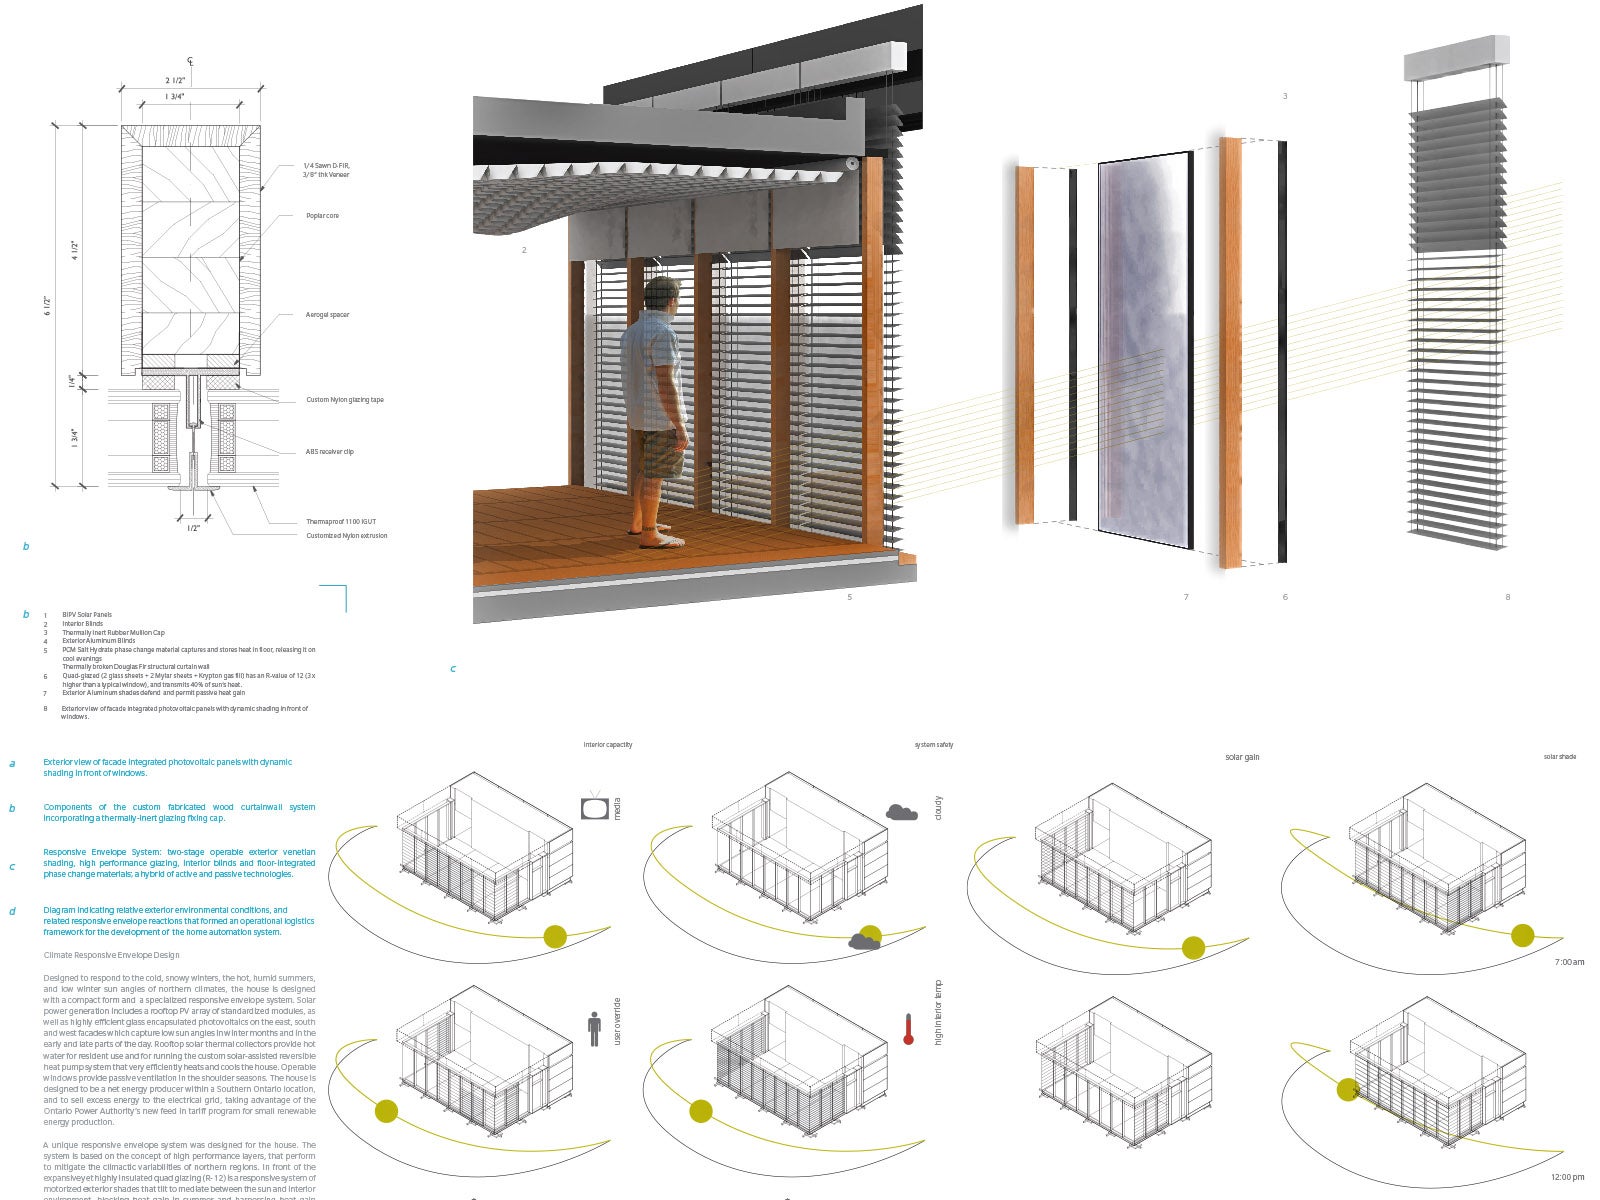 A presentation panel extract showing a perspective section, diagrams, cladding materials, and solar shading diagrams.